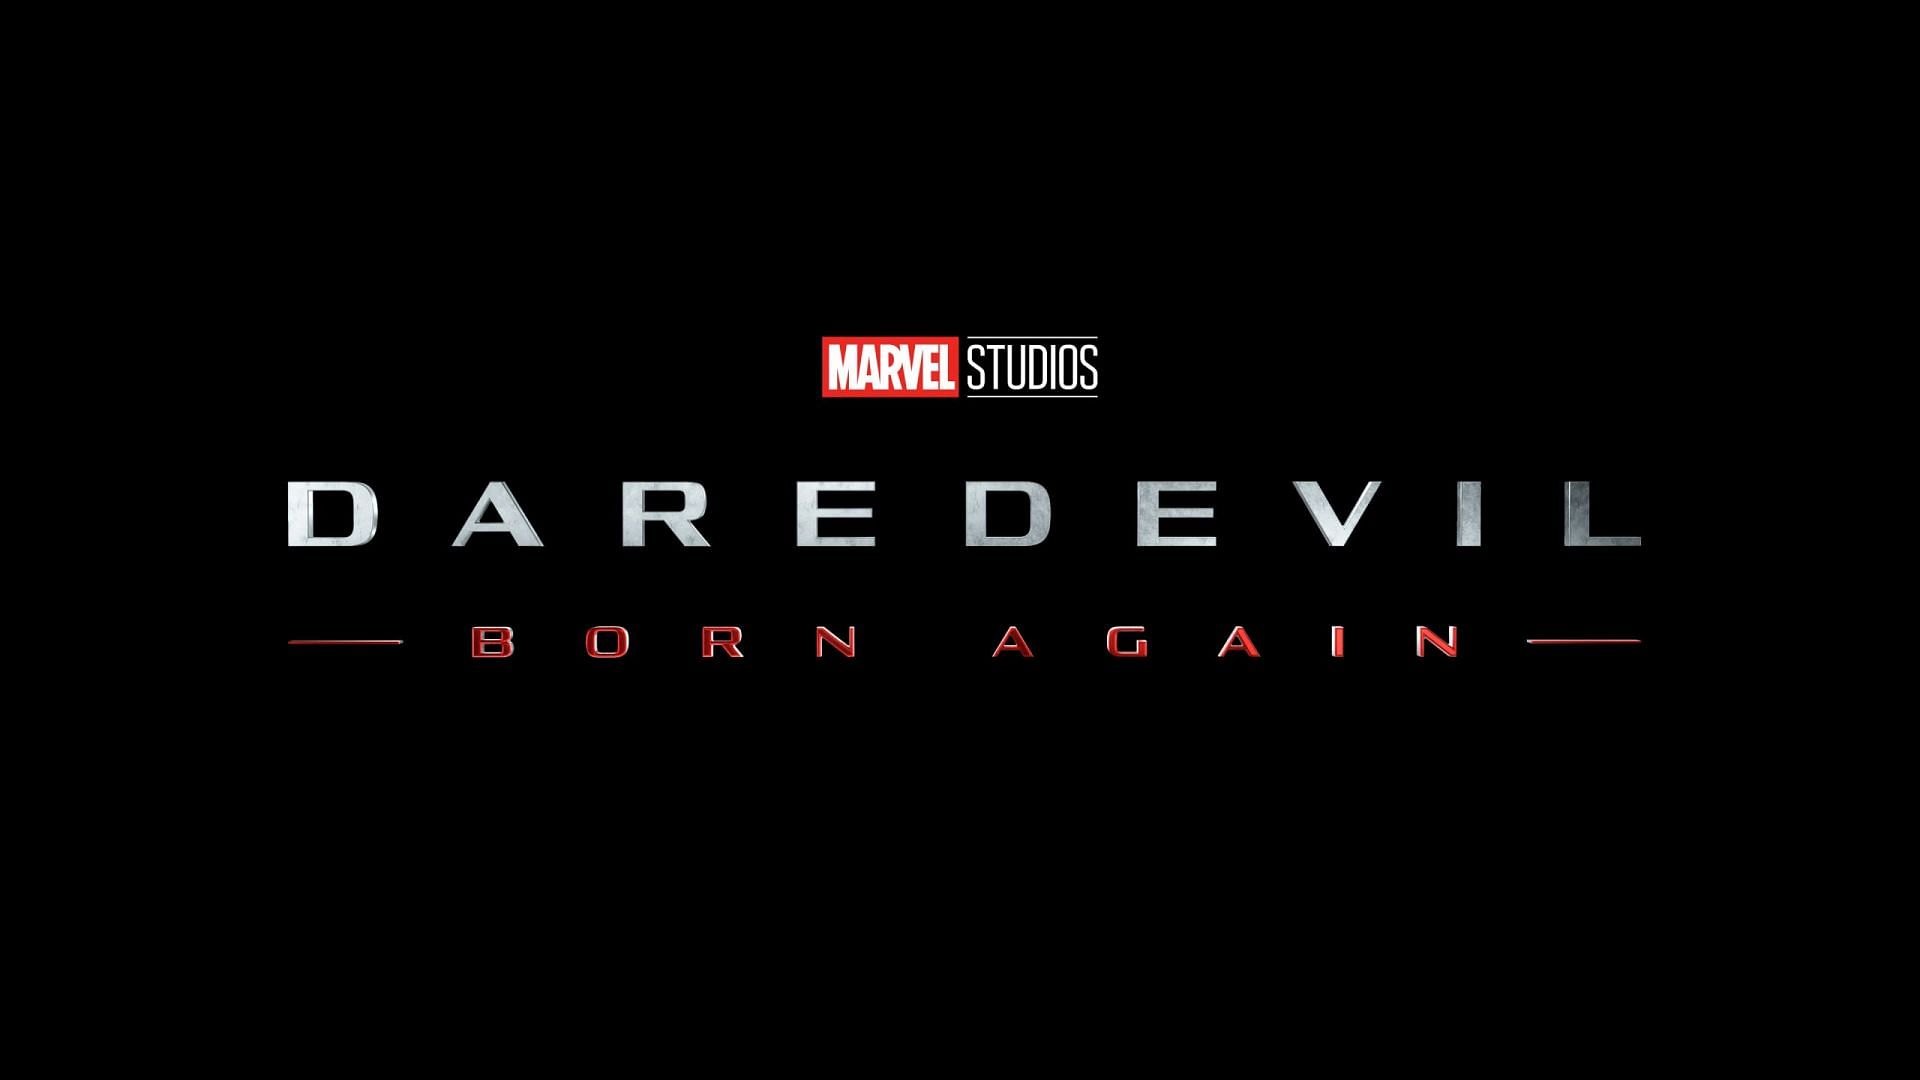 Daredevil, played by Charlie Cox, is making his triumphant return to the screen. (Image via Sportskeeda)